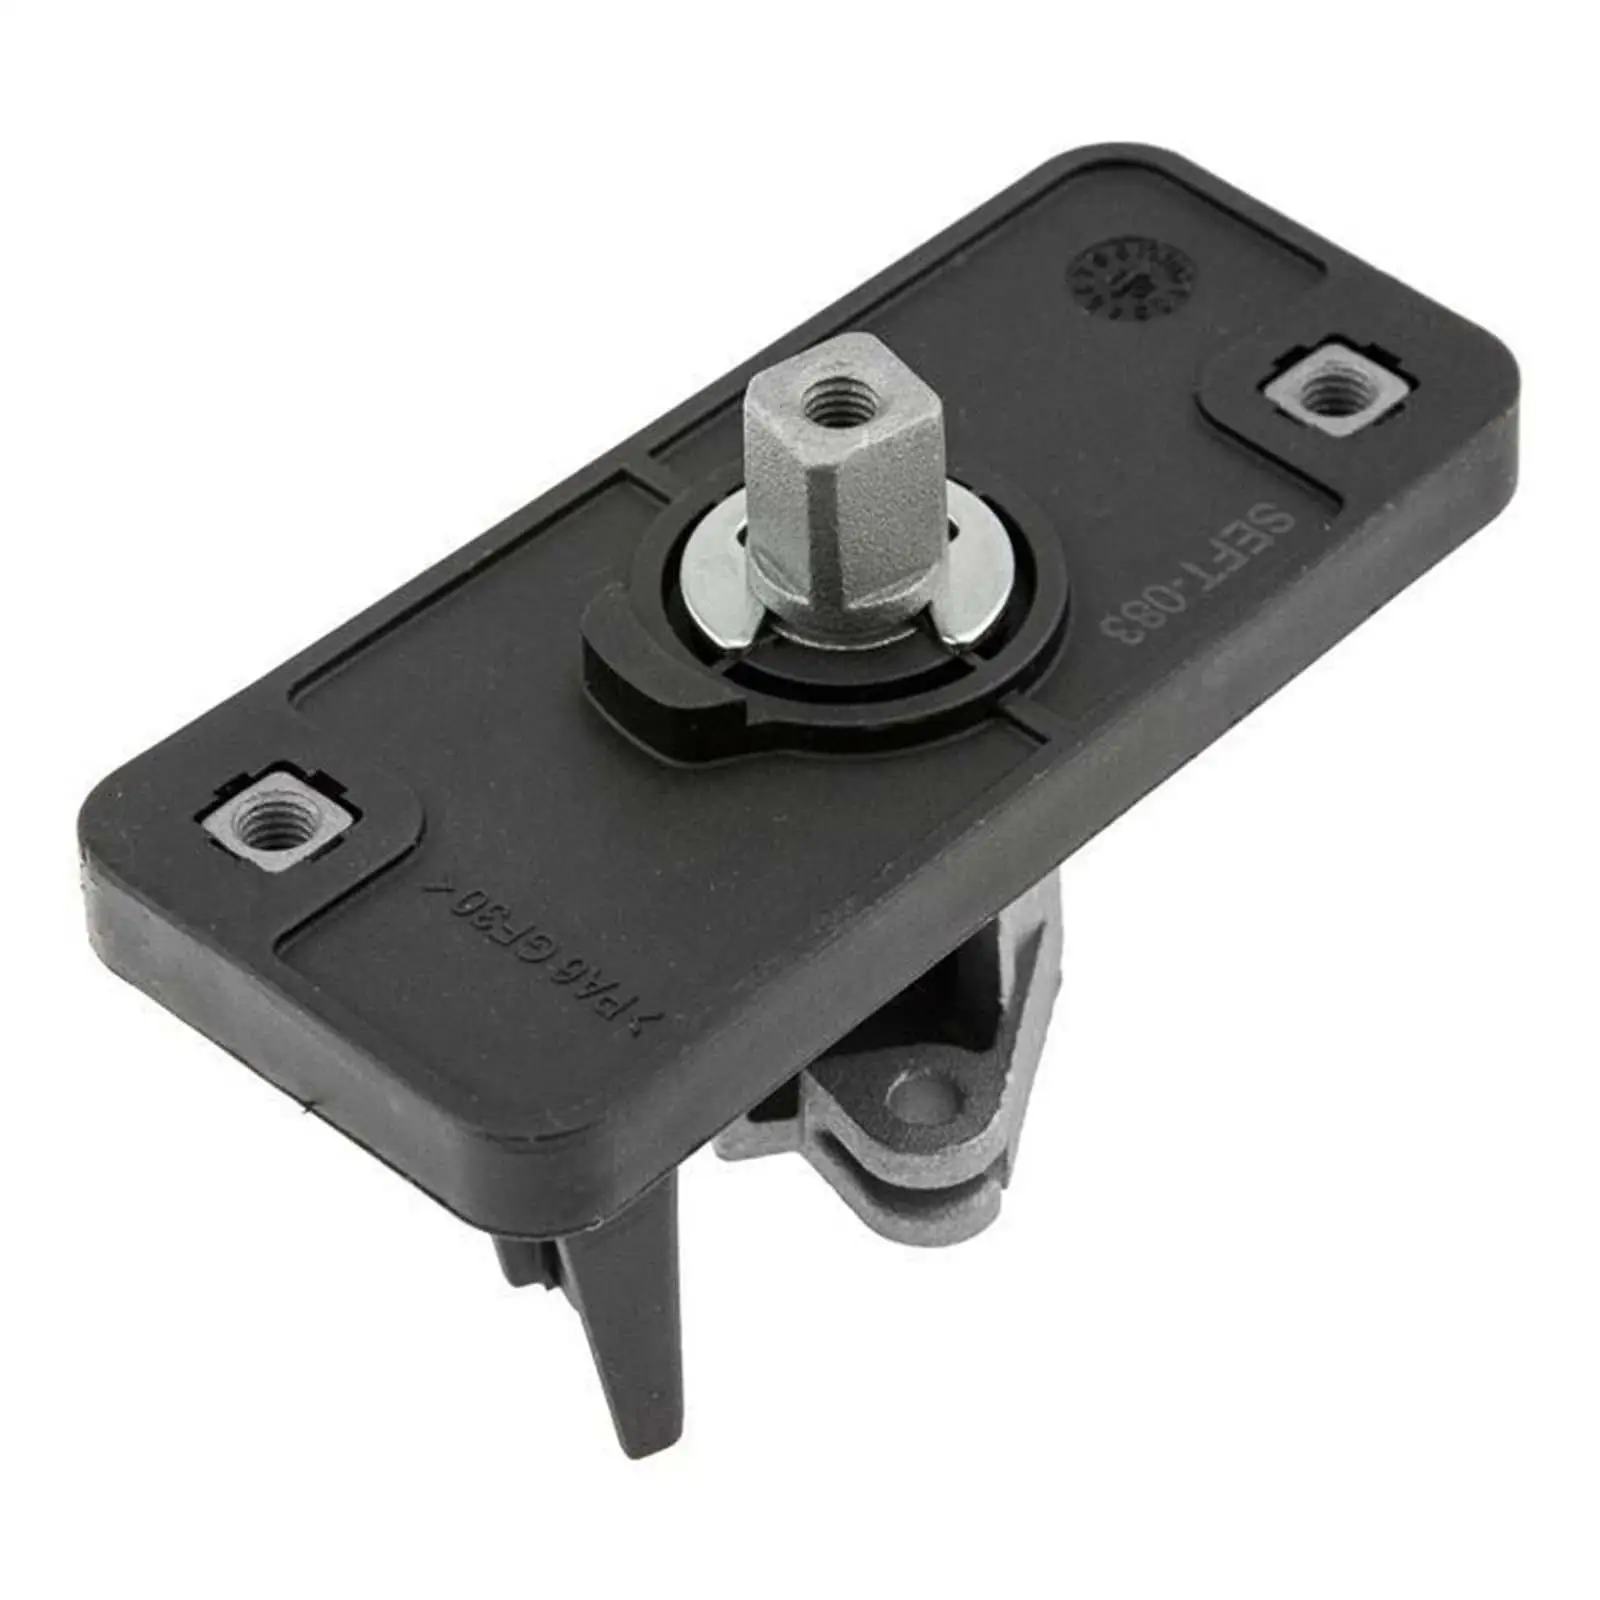 Car Back Door Lock 1356490080 Replaces for Peugeot Boxer Easily Install